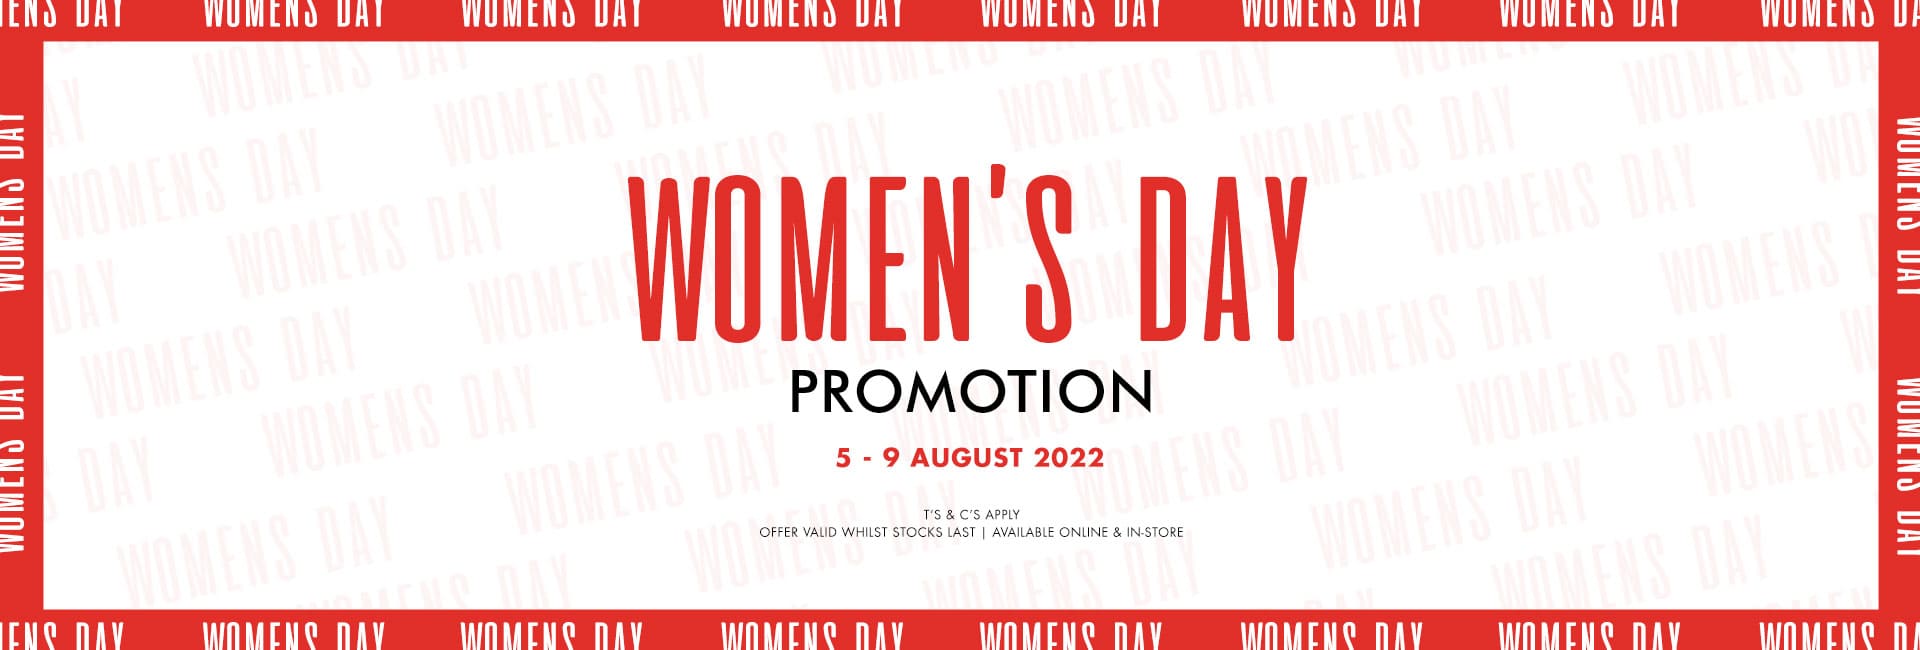 Women's Day Promotion